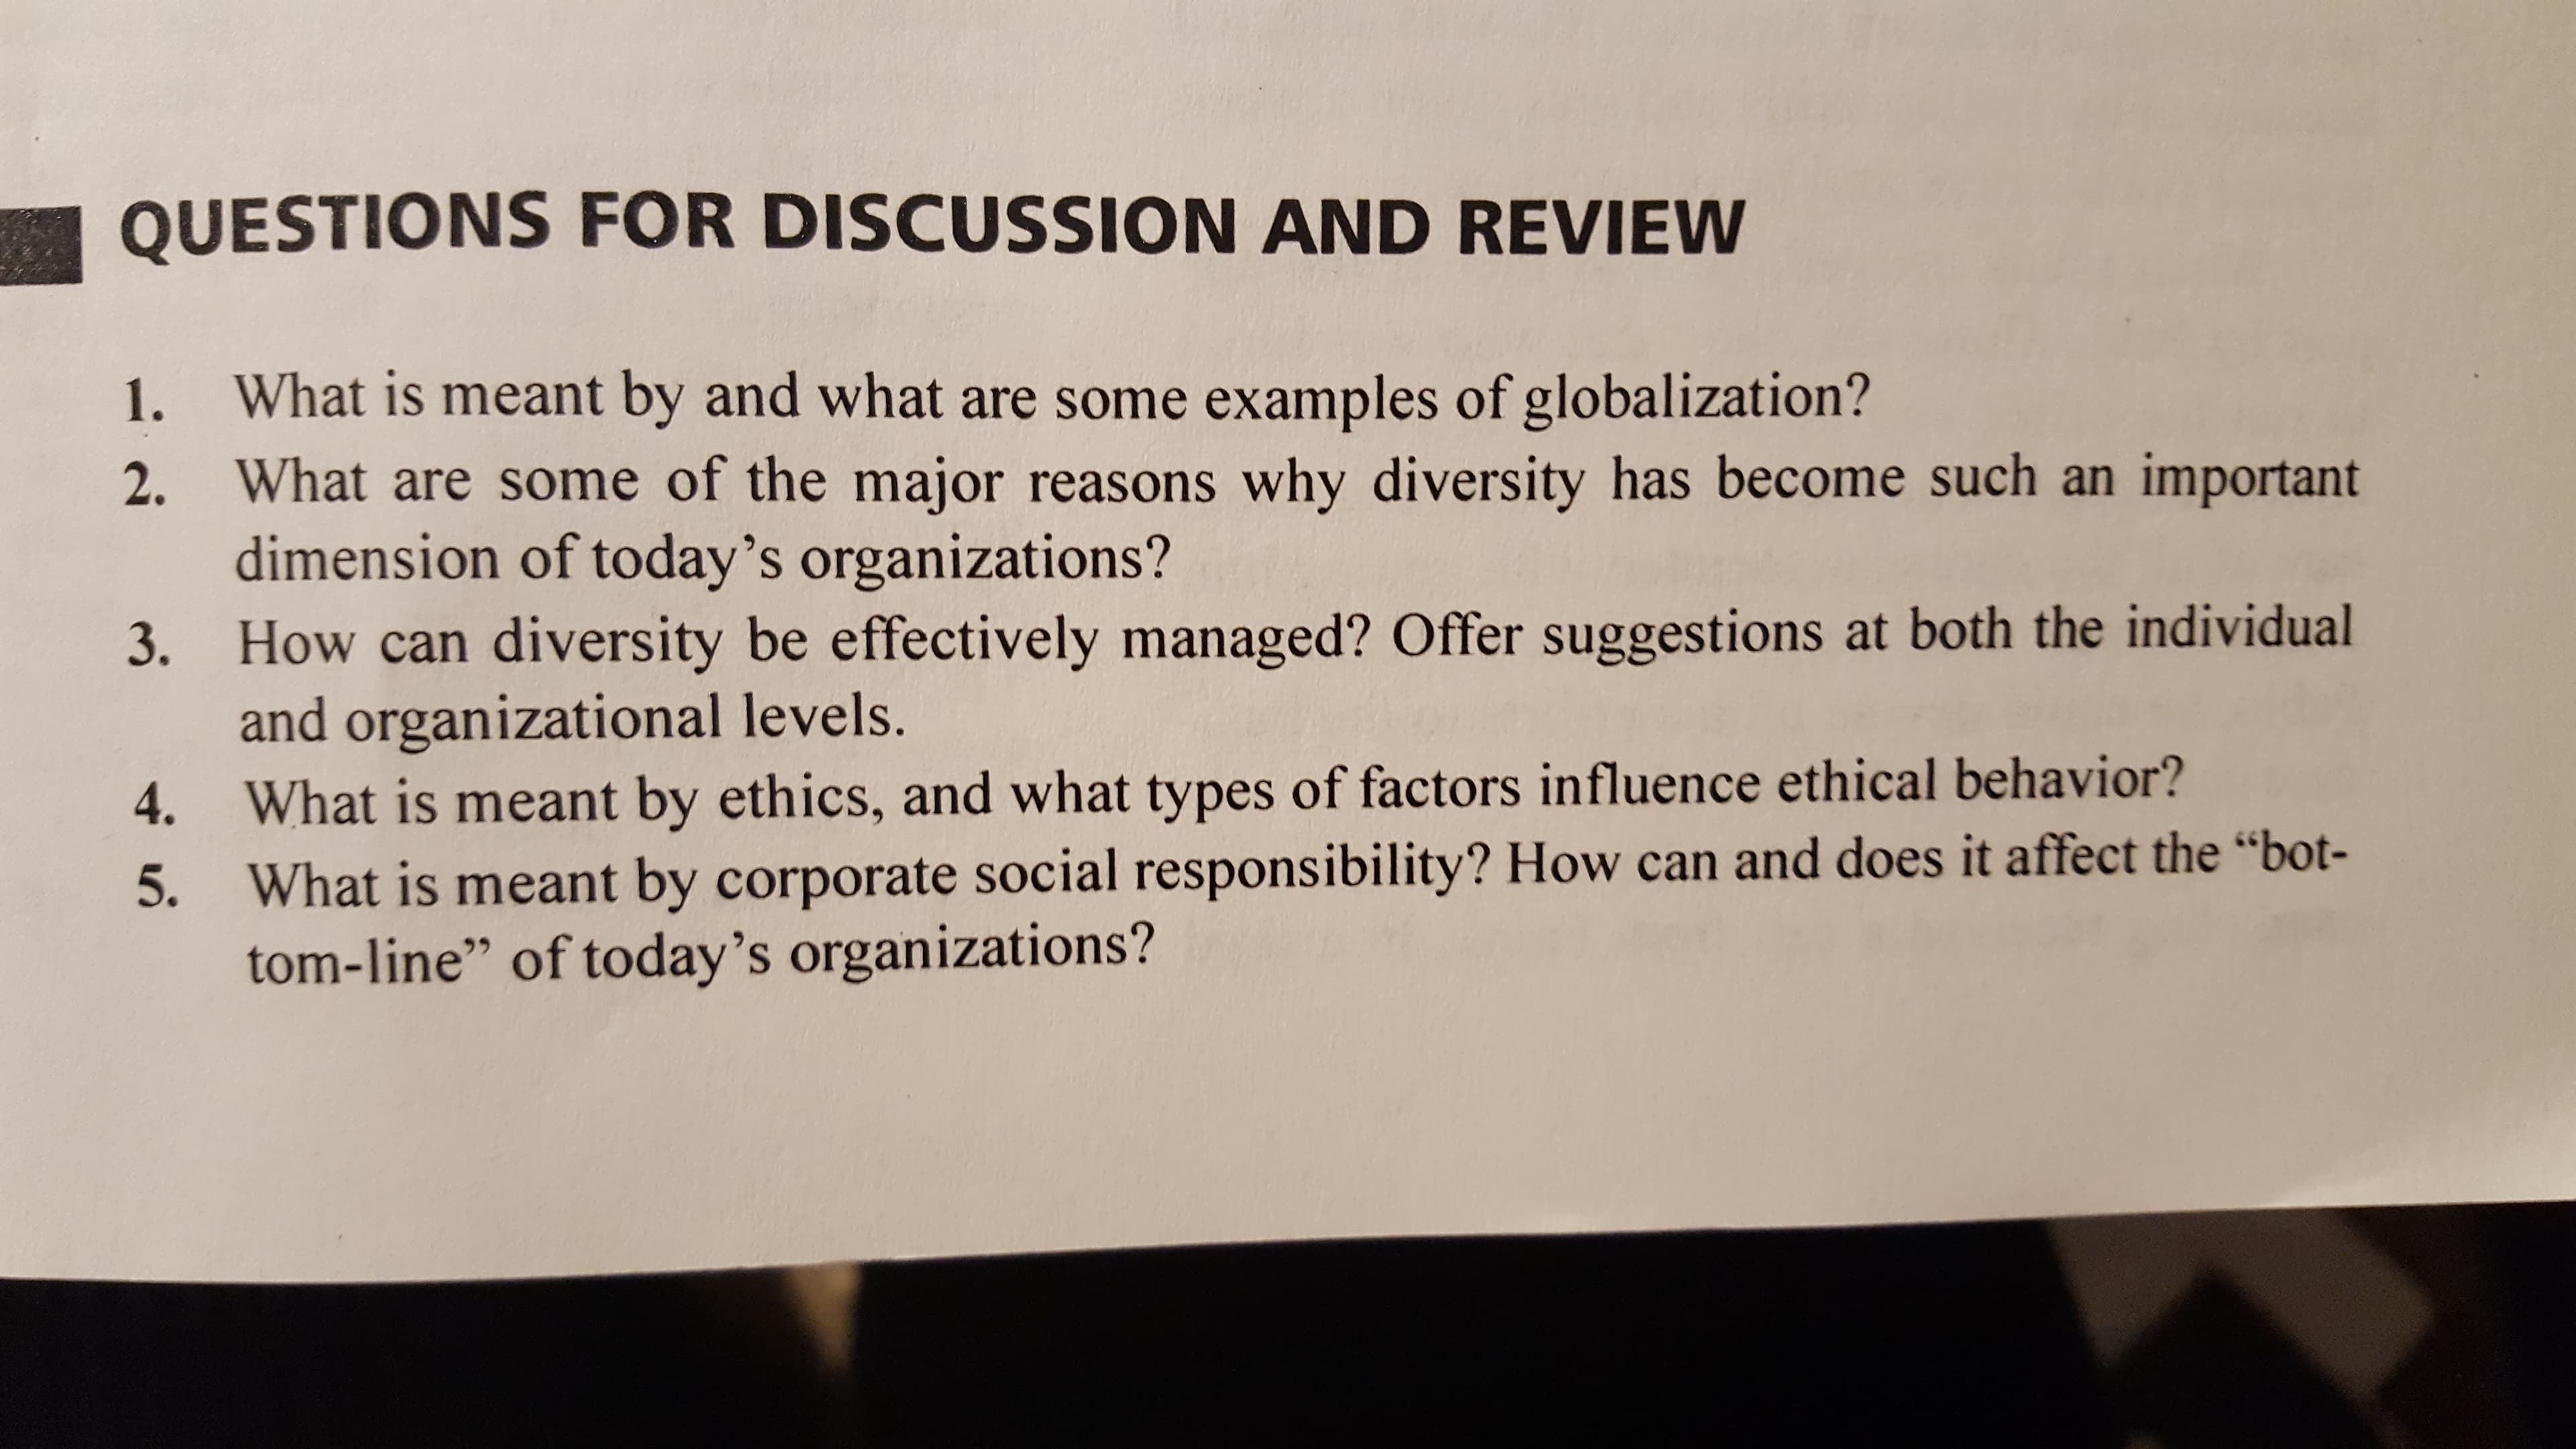 QUESTIONS FOR DISCUSSION AND REVIEW
1. What is meant by and what are some examples of globalization?
2. What are some of the major reasons why diversity has become such an important
dimension of today's organizations?
How can diversity be effectively managed? Offer suggestions at both the individual
and organizational levels.
What is meant by ethics, and what types of factors influence ethical behavior?
What is meant by corporate social responsibility? How can and does it affect the "bot-
tom-line" of today's organizations?
3.
4.
5.
